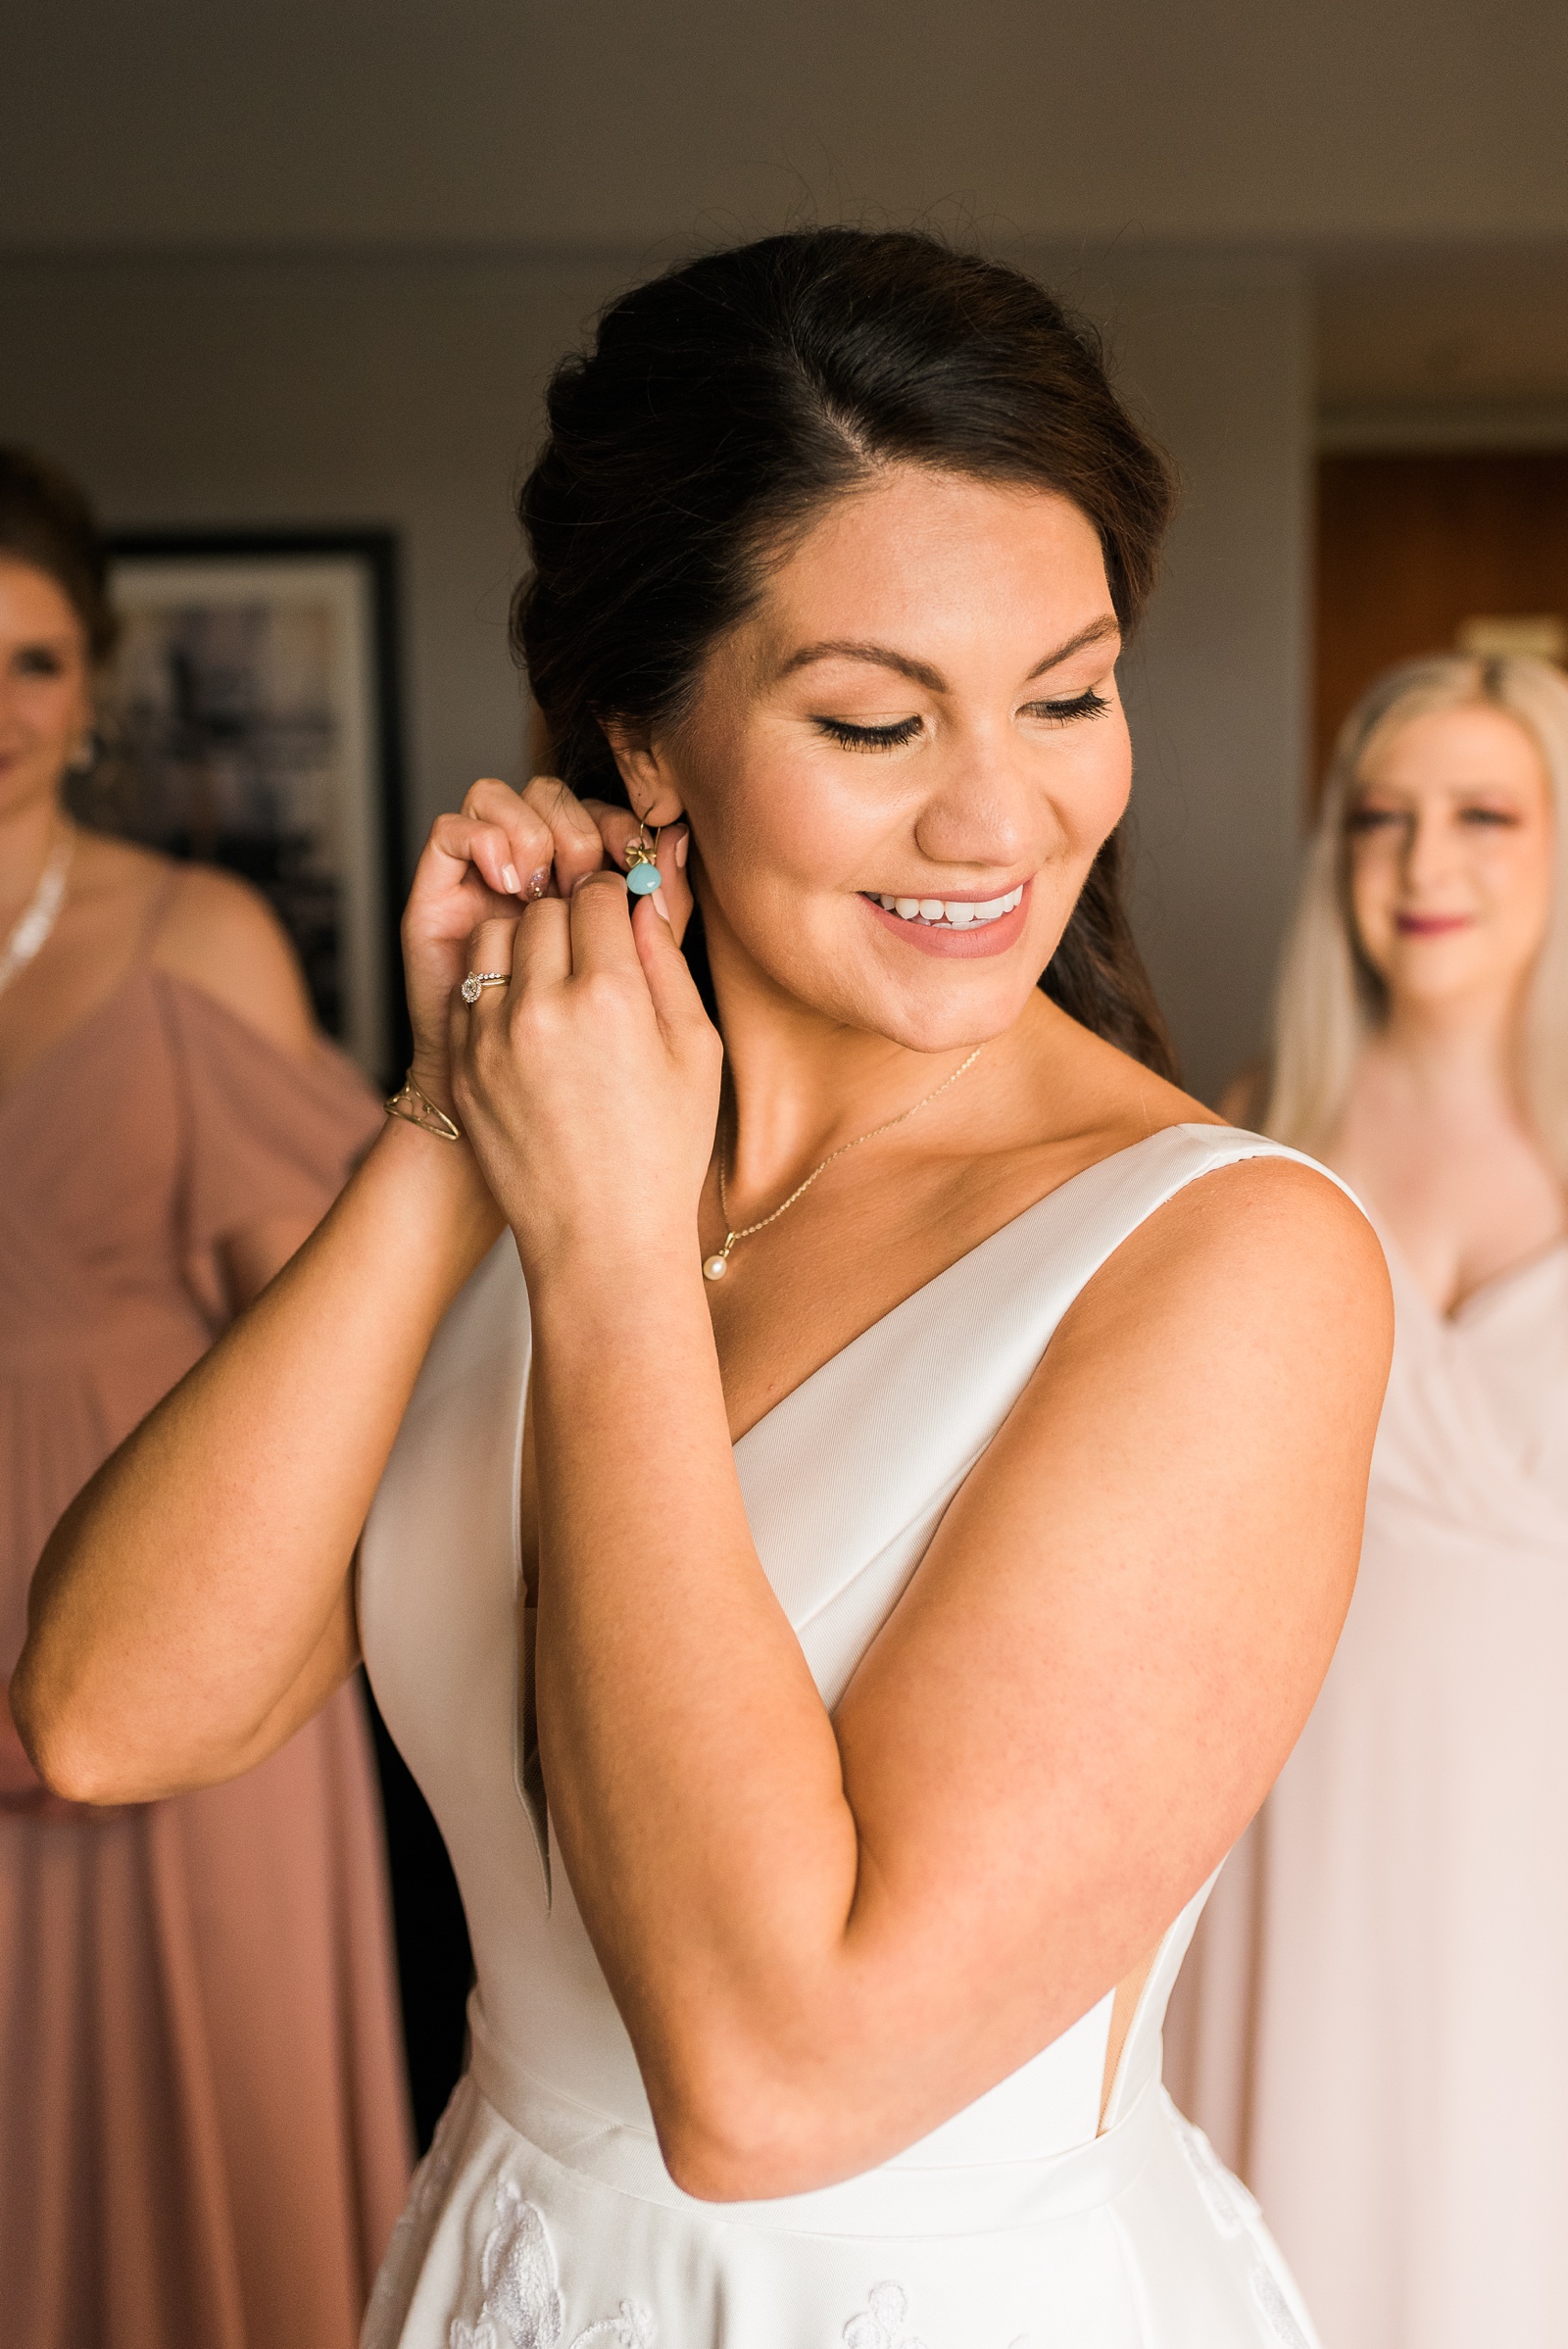 Bride smiling and putting in earrings